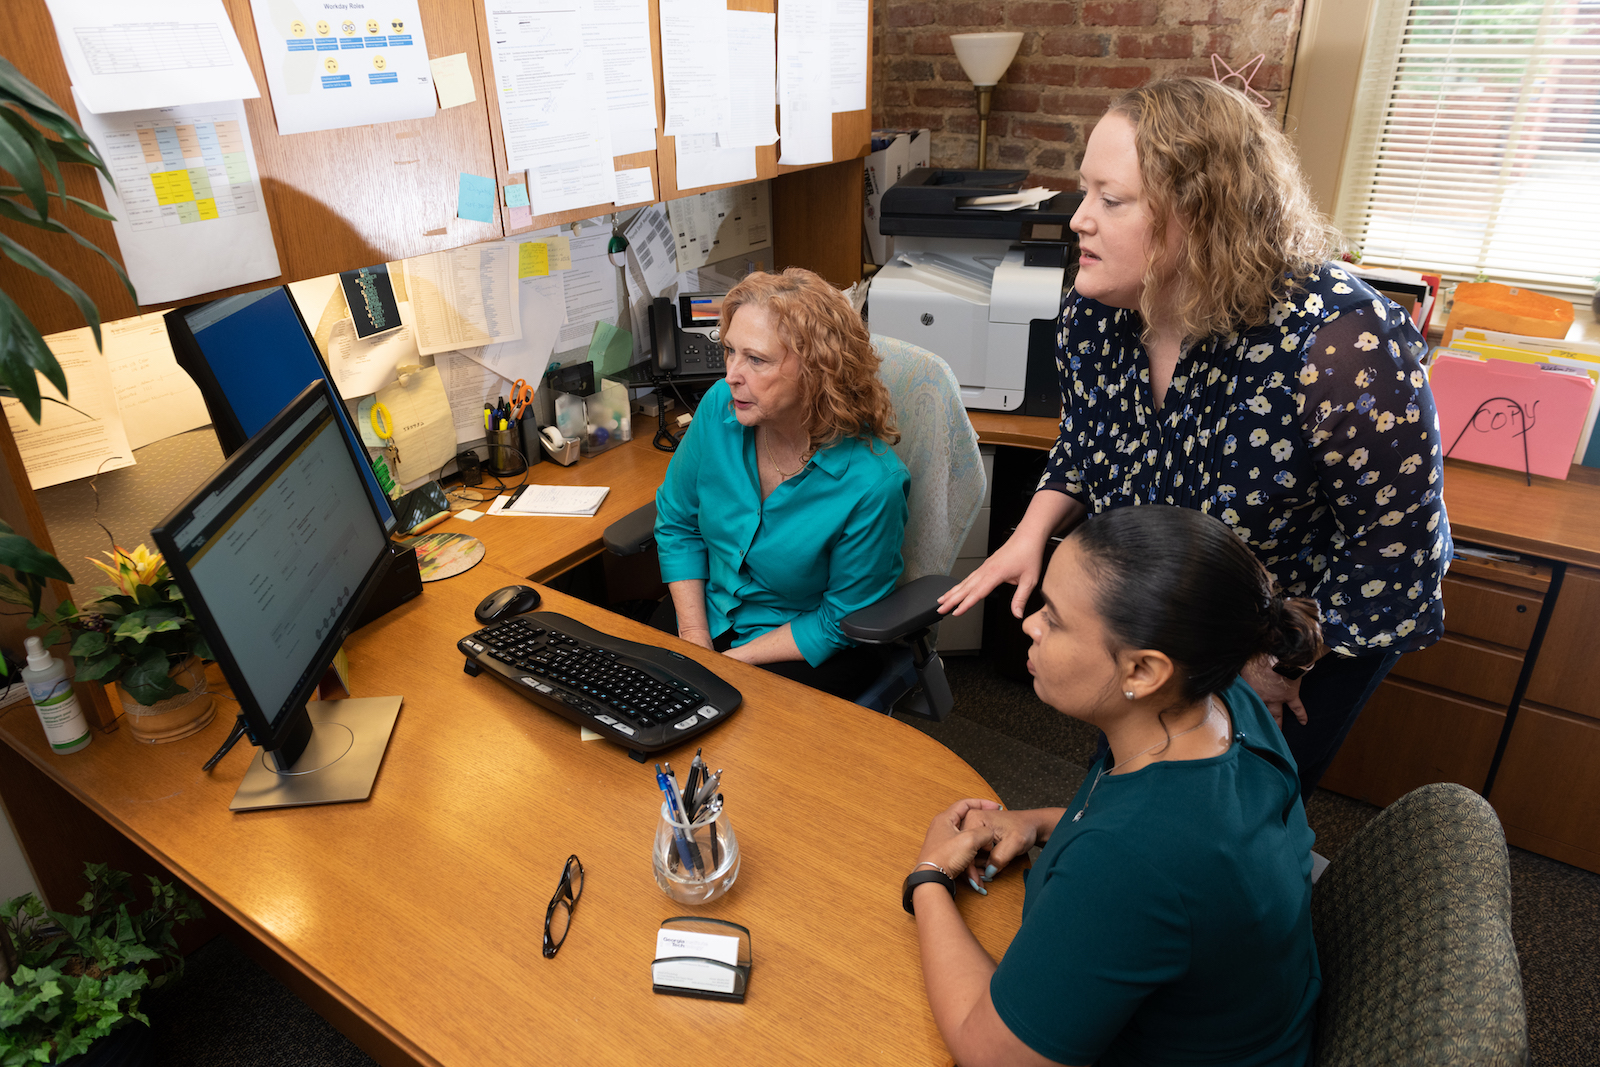 Erin Nagle (standing), faculty affairs administrative manager for the College of Sciences, talks with Leslie Dionne White (left), administrative manager of the School of Psychology, and Kristie Clark, assistant to the chair of the School of Psychology.